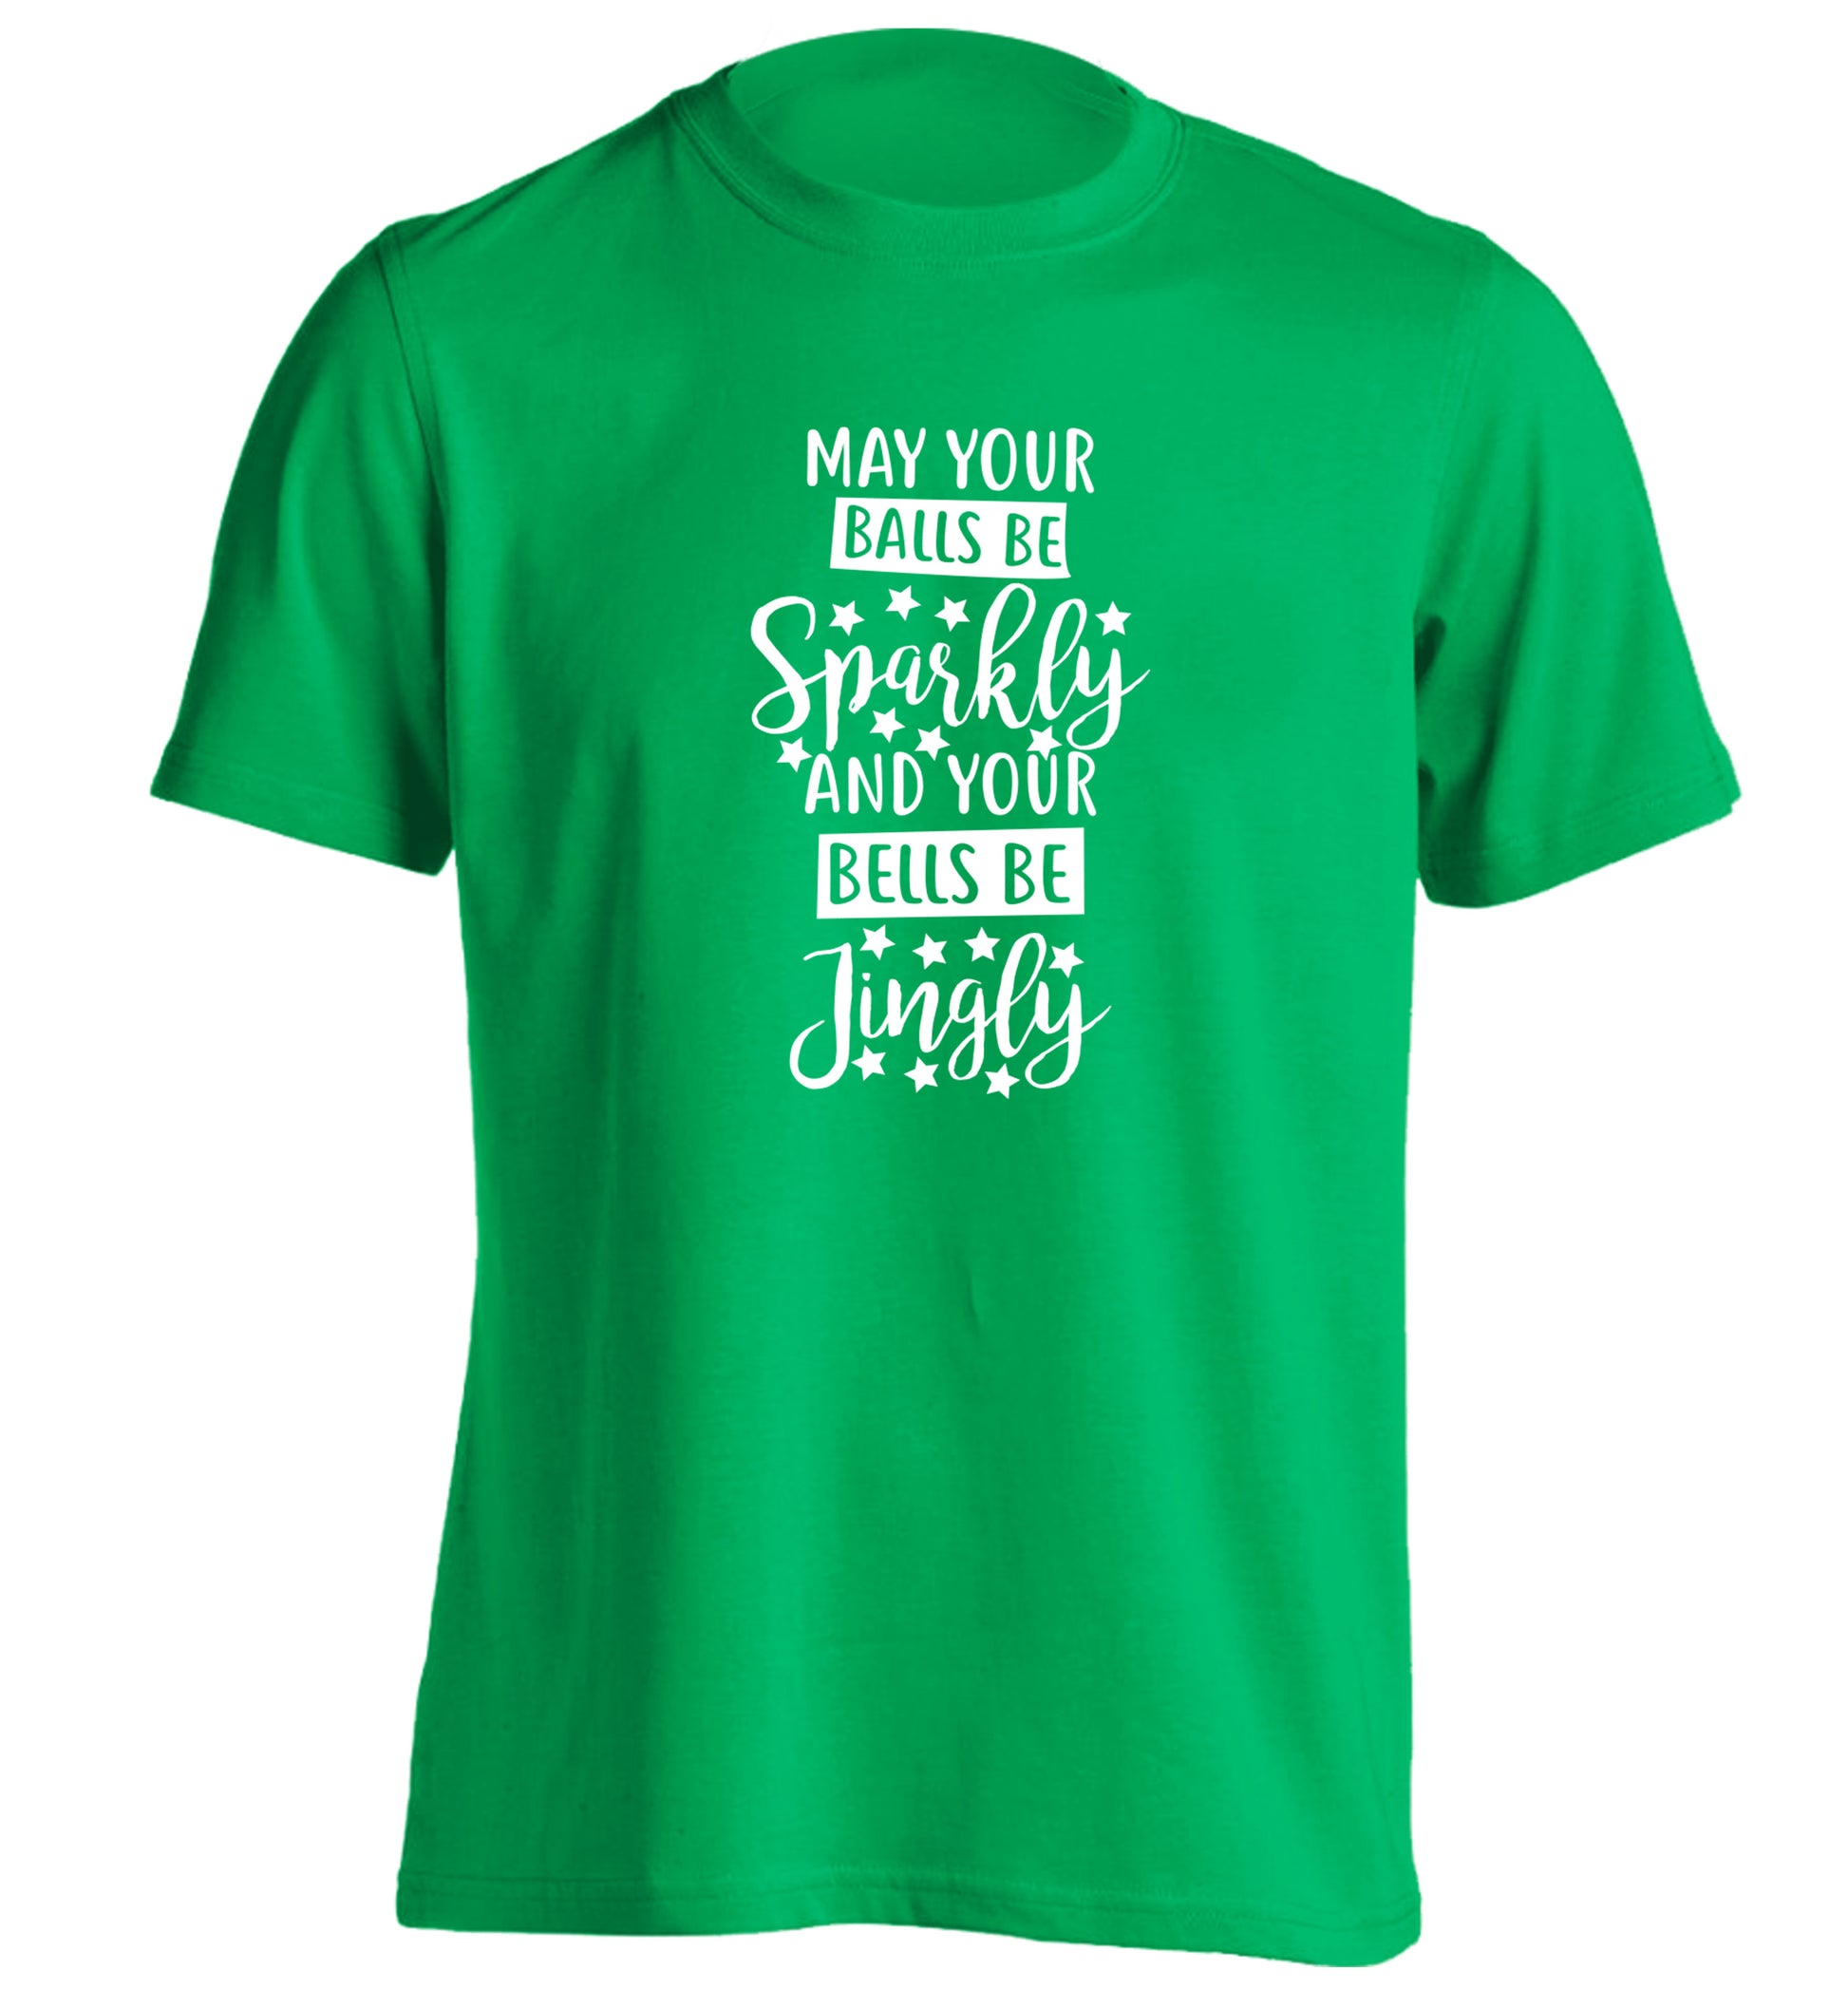 May your balls be sparkly and your bells be jingly adults unisex green Tshirt 2XL